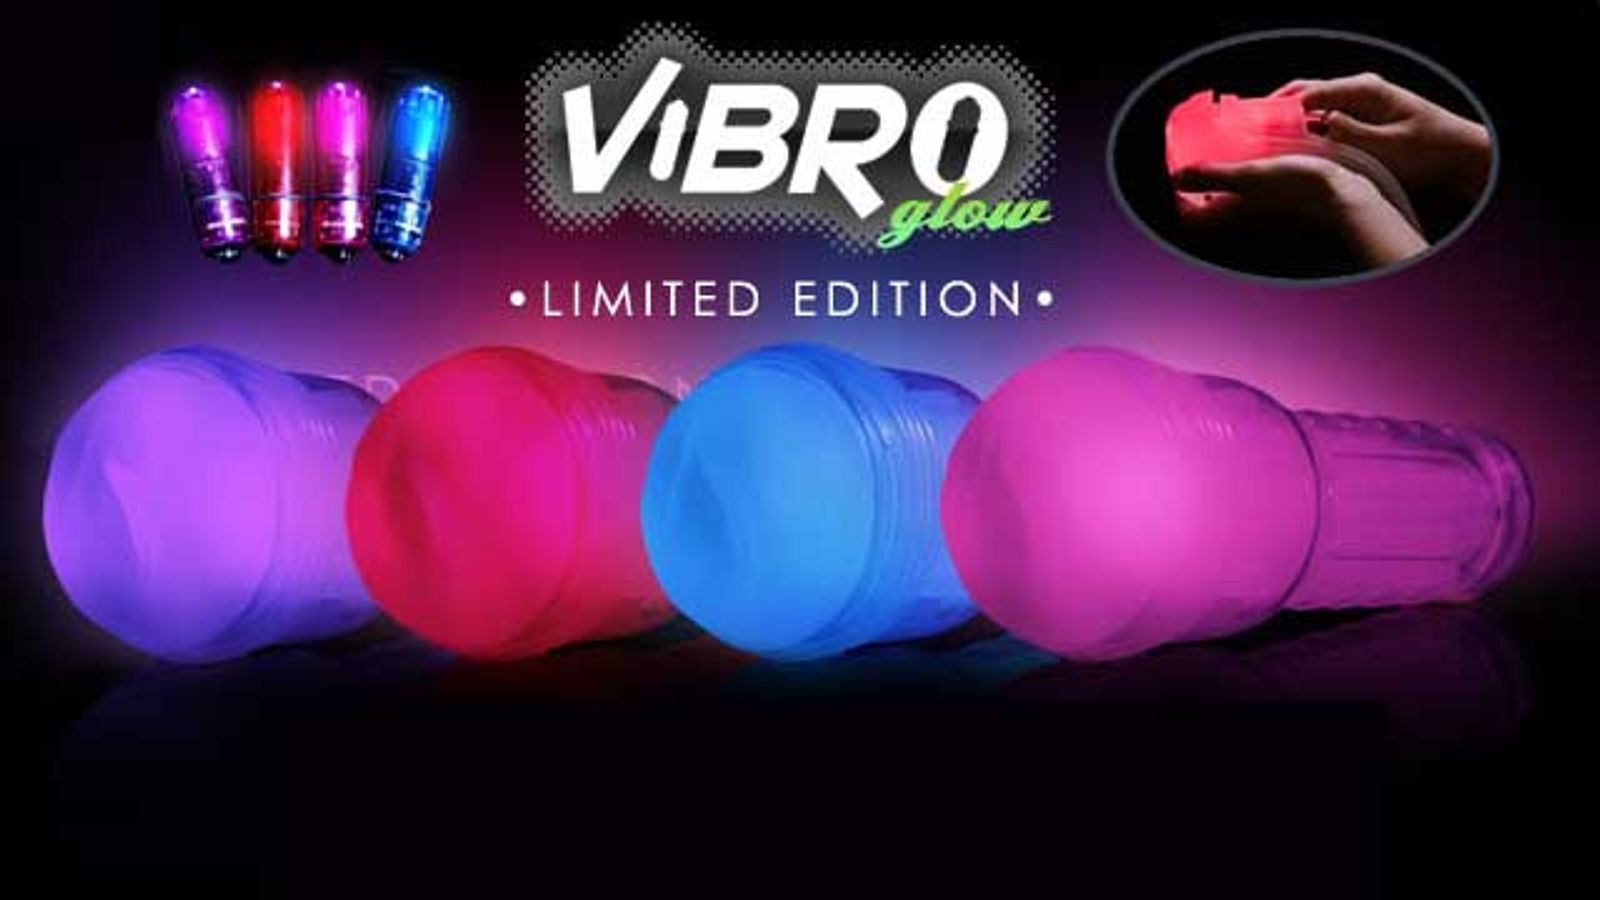 Fleshlight Introduces Limited Edition Ice Vibro Glow